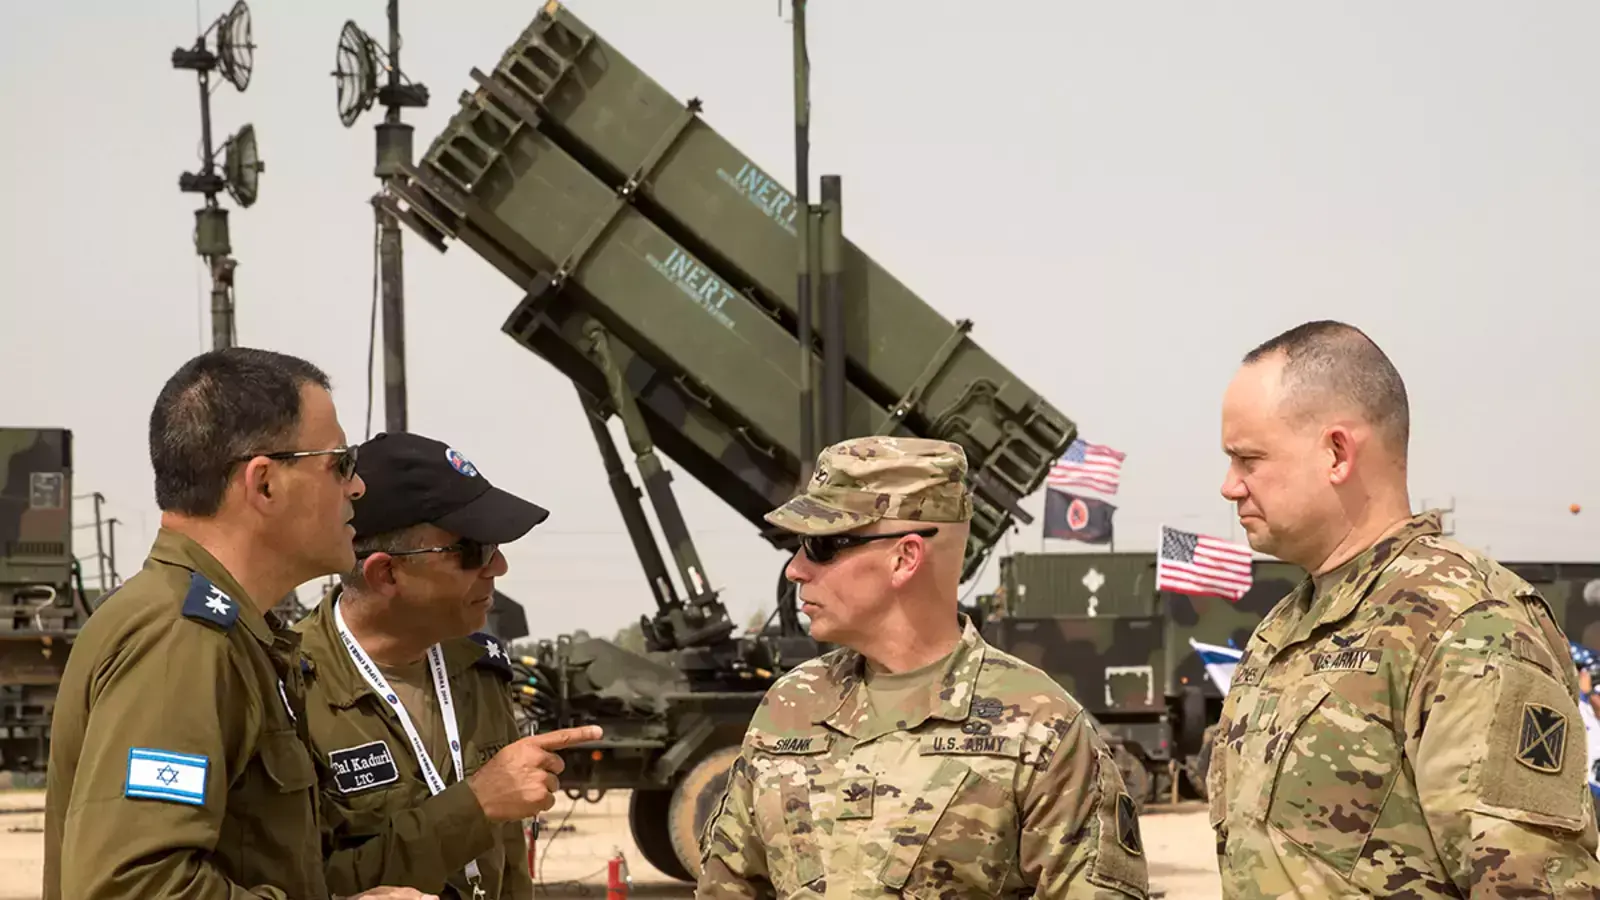 U.S. and Israeli army officers talk in front a US Patriot missile defense system.